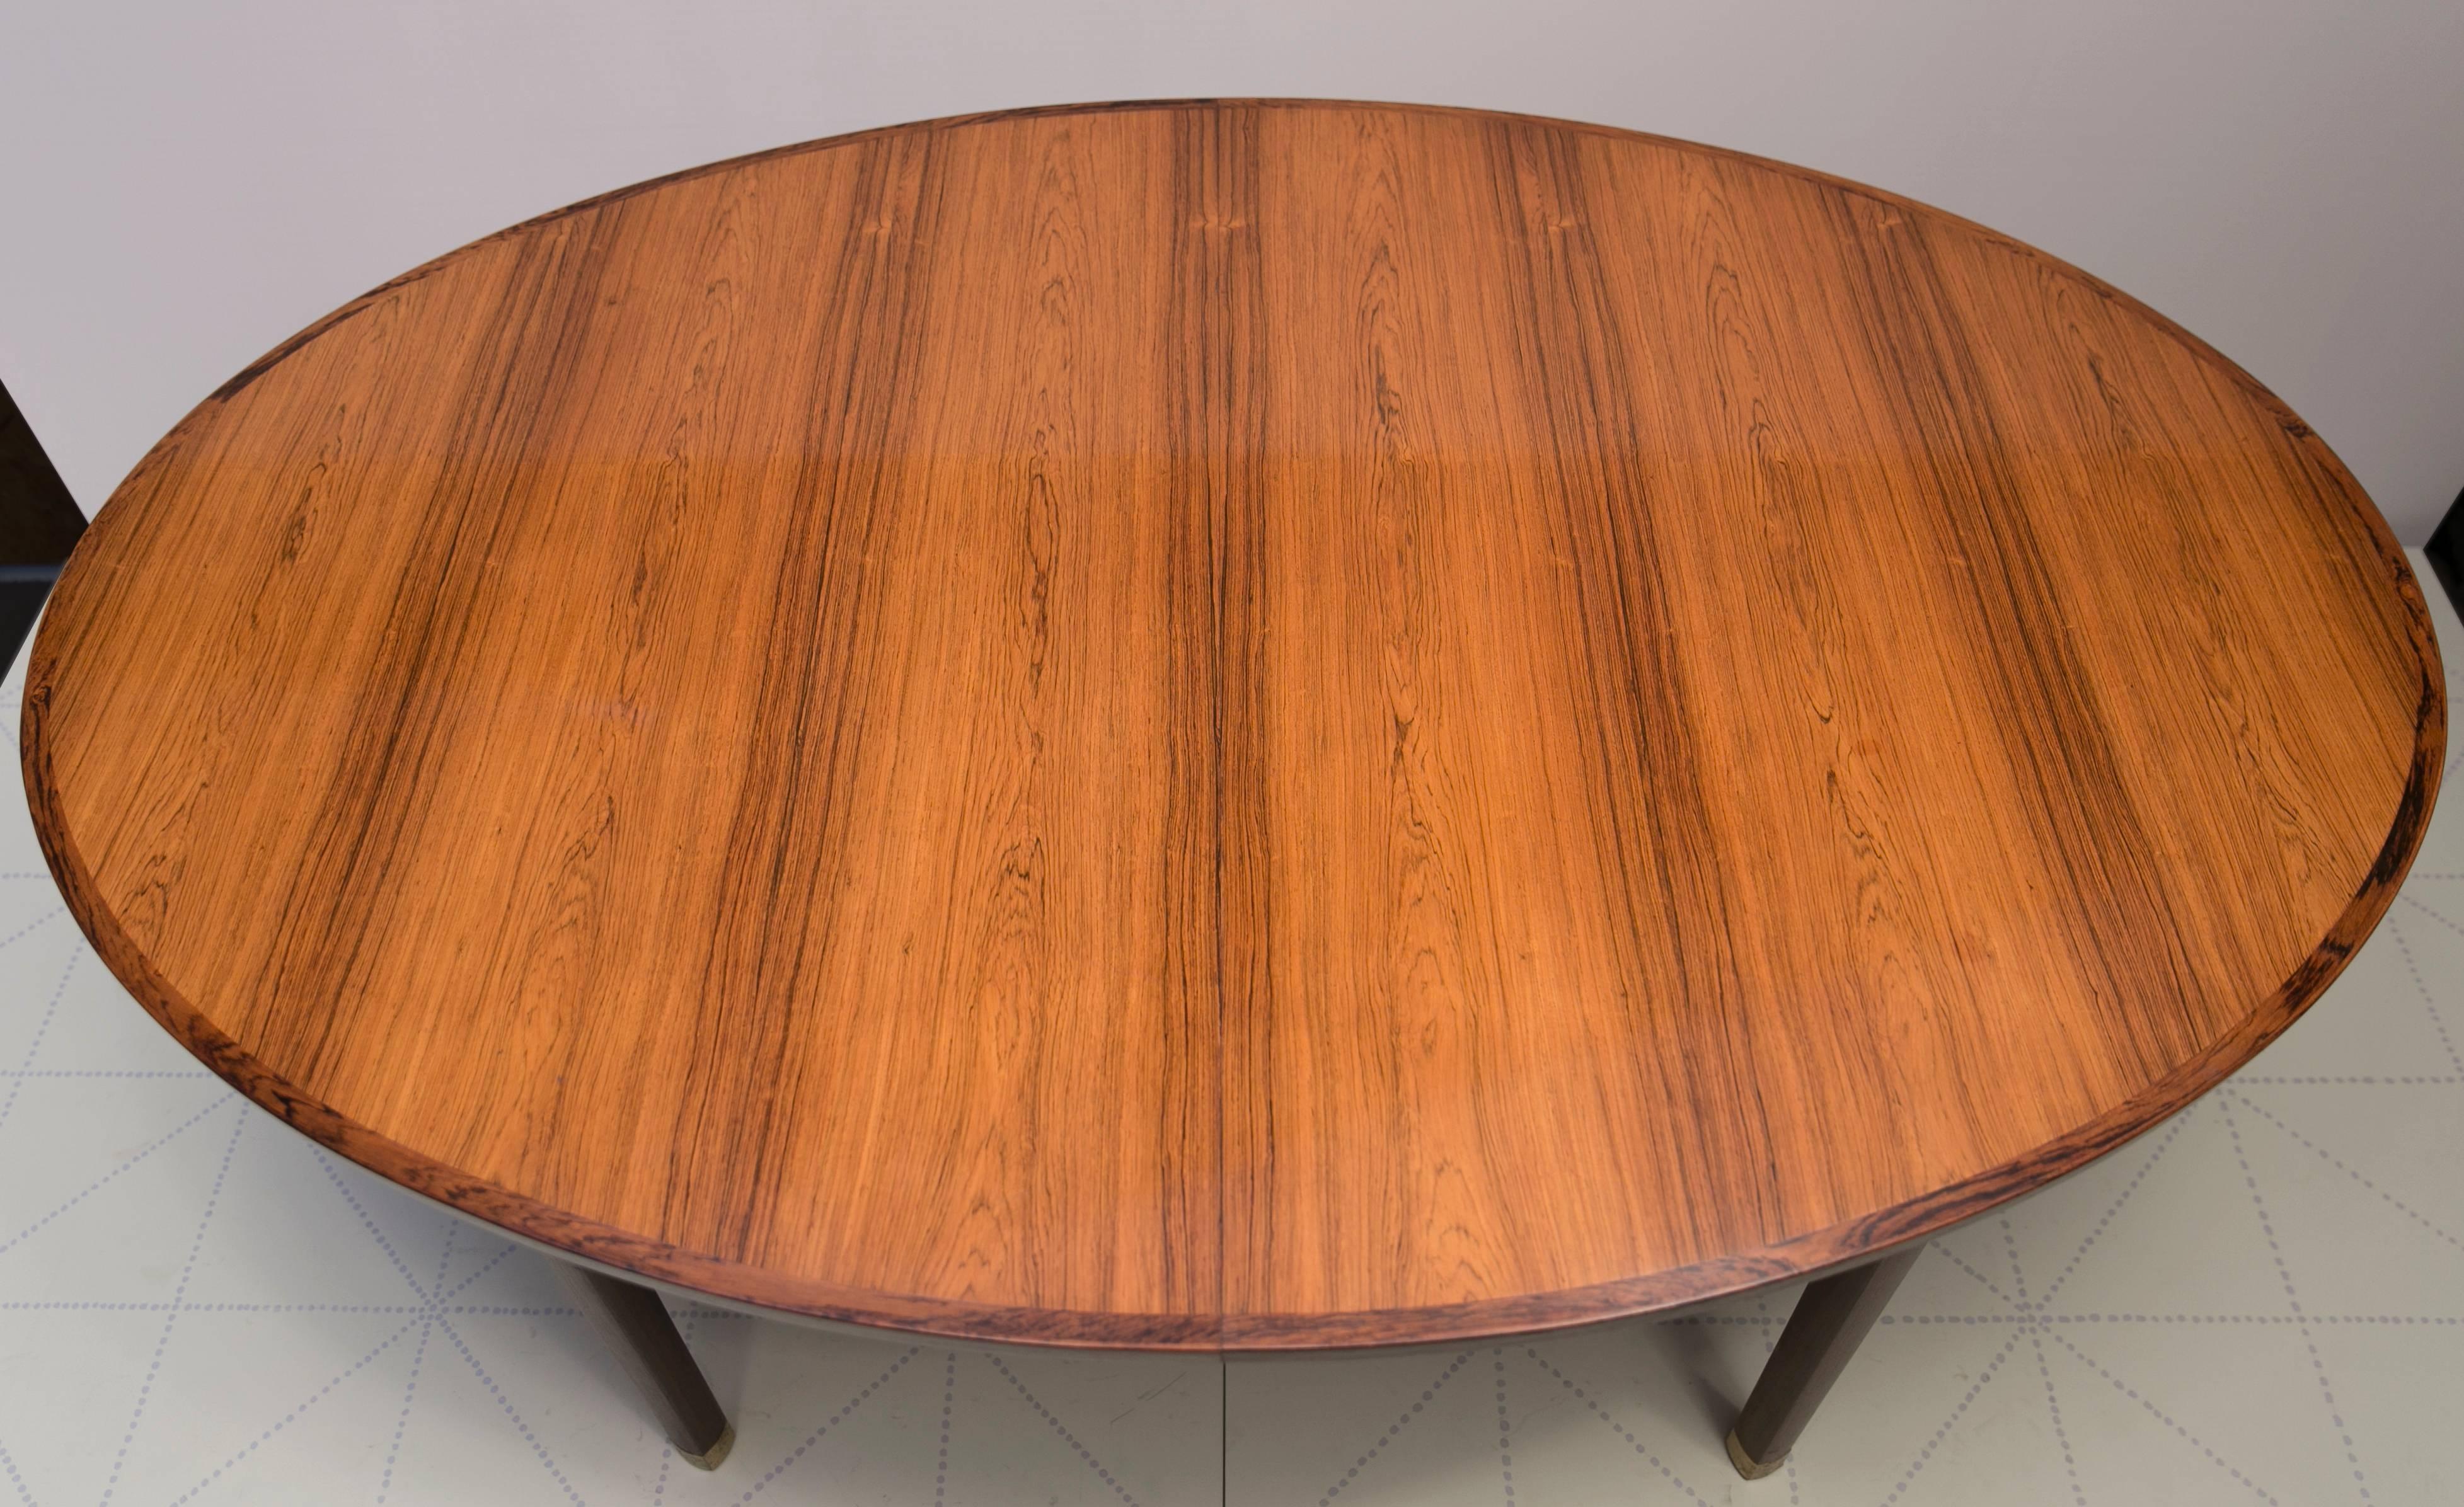 This dining table stands out for its simple yet highly sophisticated and beautiful lines. The top is constructed of high quality Brazilian rosewood veneer surrounded by molded solid rosewood edging. The legs and apron also display beautiful sculpted